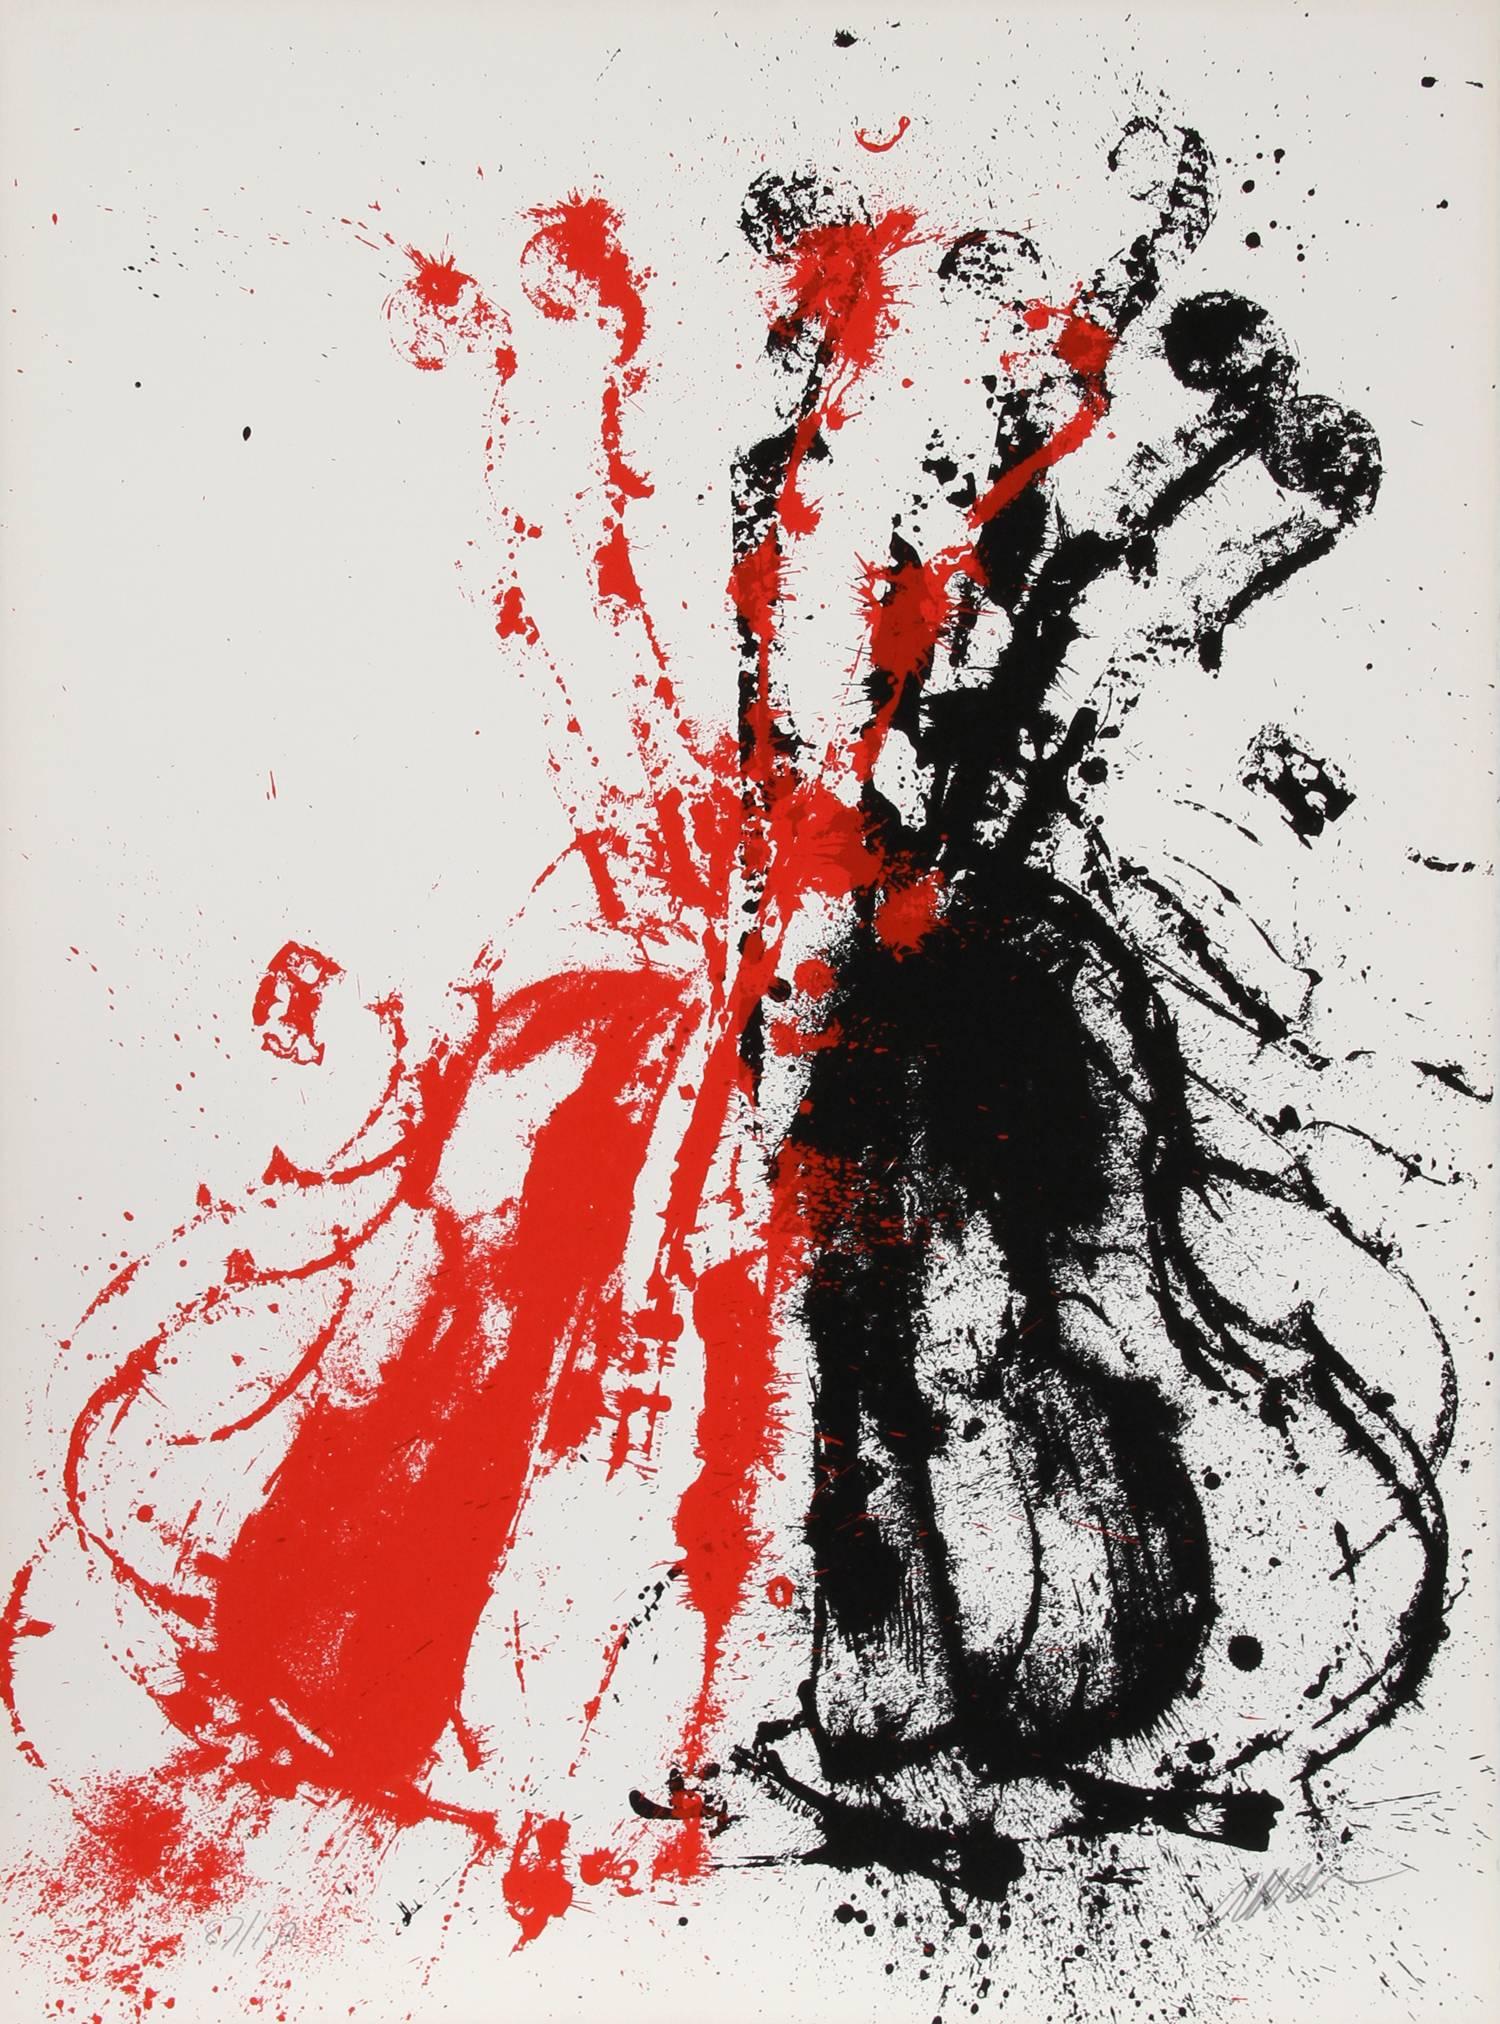 Artist:  Arman, French (1929 - 2005)
Title:  Violents Violin II
Year:  1978
Medium:  Serigraph, signed and numbered in pencil
Edition:  150, AP 30
Size:  30 in. x 22 in. (76.2 cm x 55.88 cm)